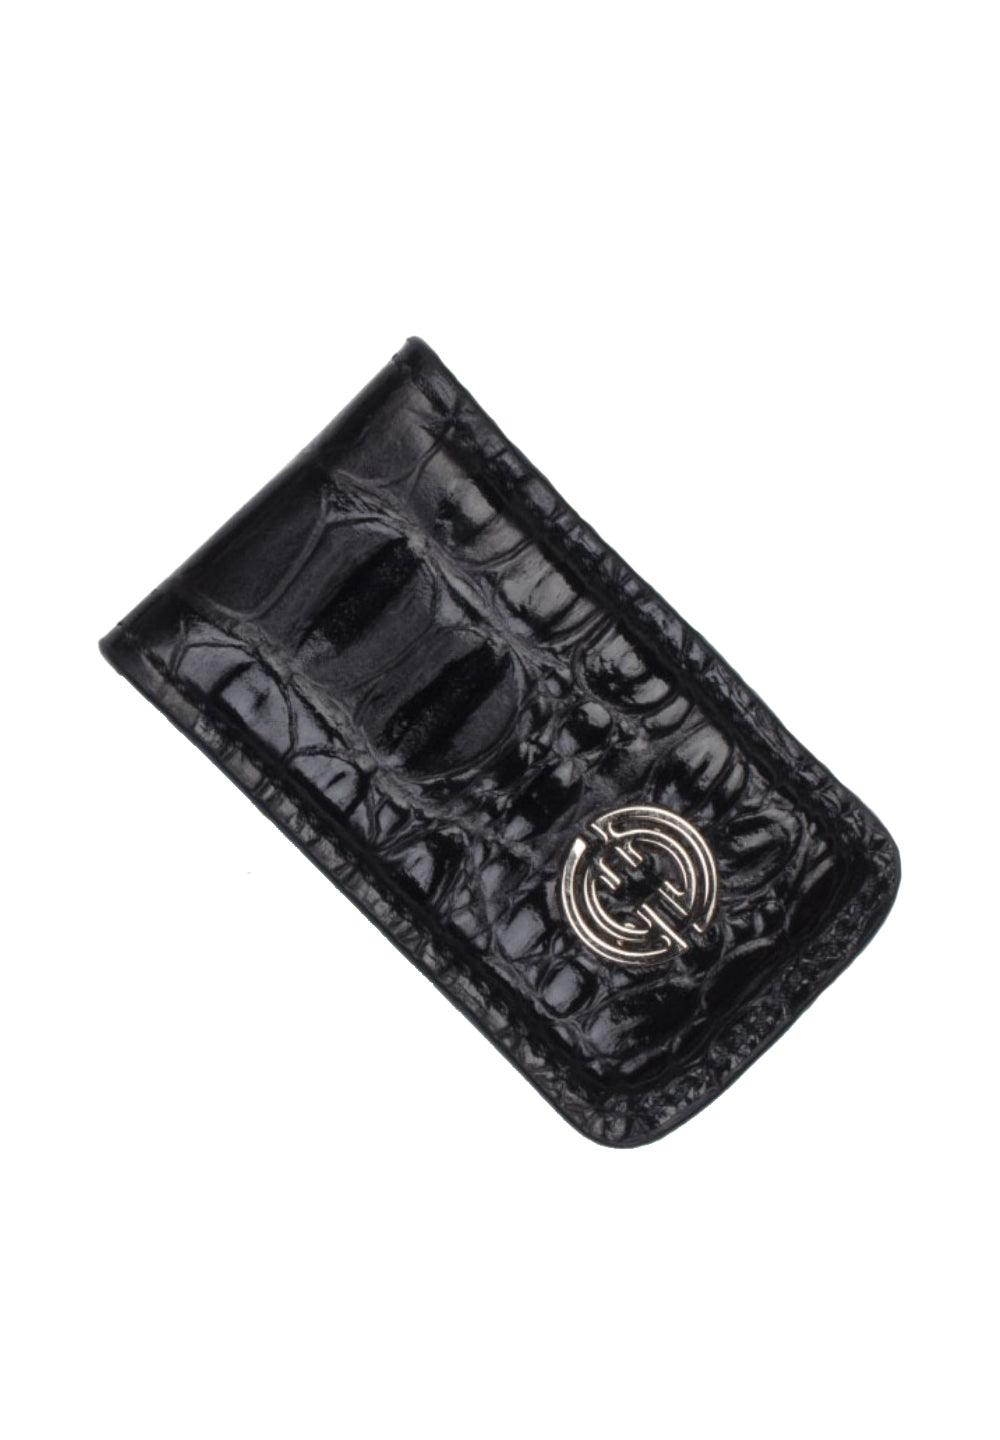 Keep it simple, yet cool, with this soft leather stamped hornback croc pattern.  Black shaded croc stamp. Genuine leather over metal clamp. Perfect to travel light and keep your valuables in your front pocket.  By Marcello Sport